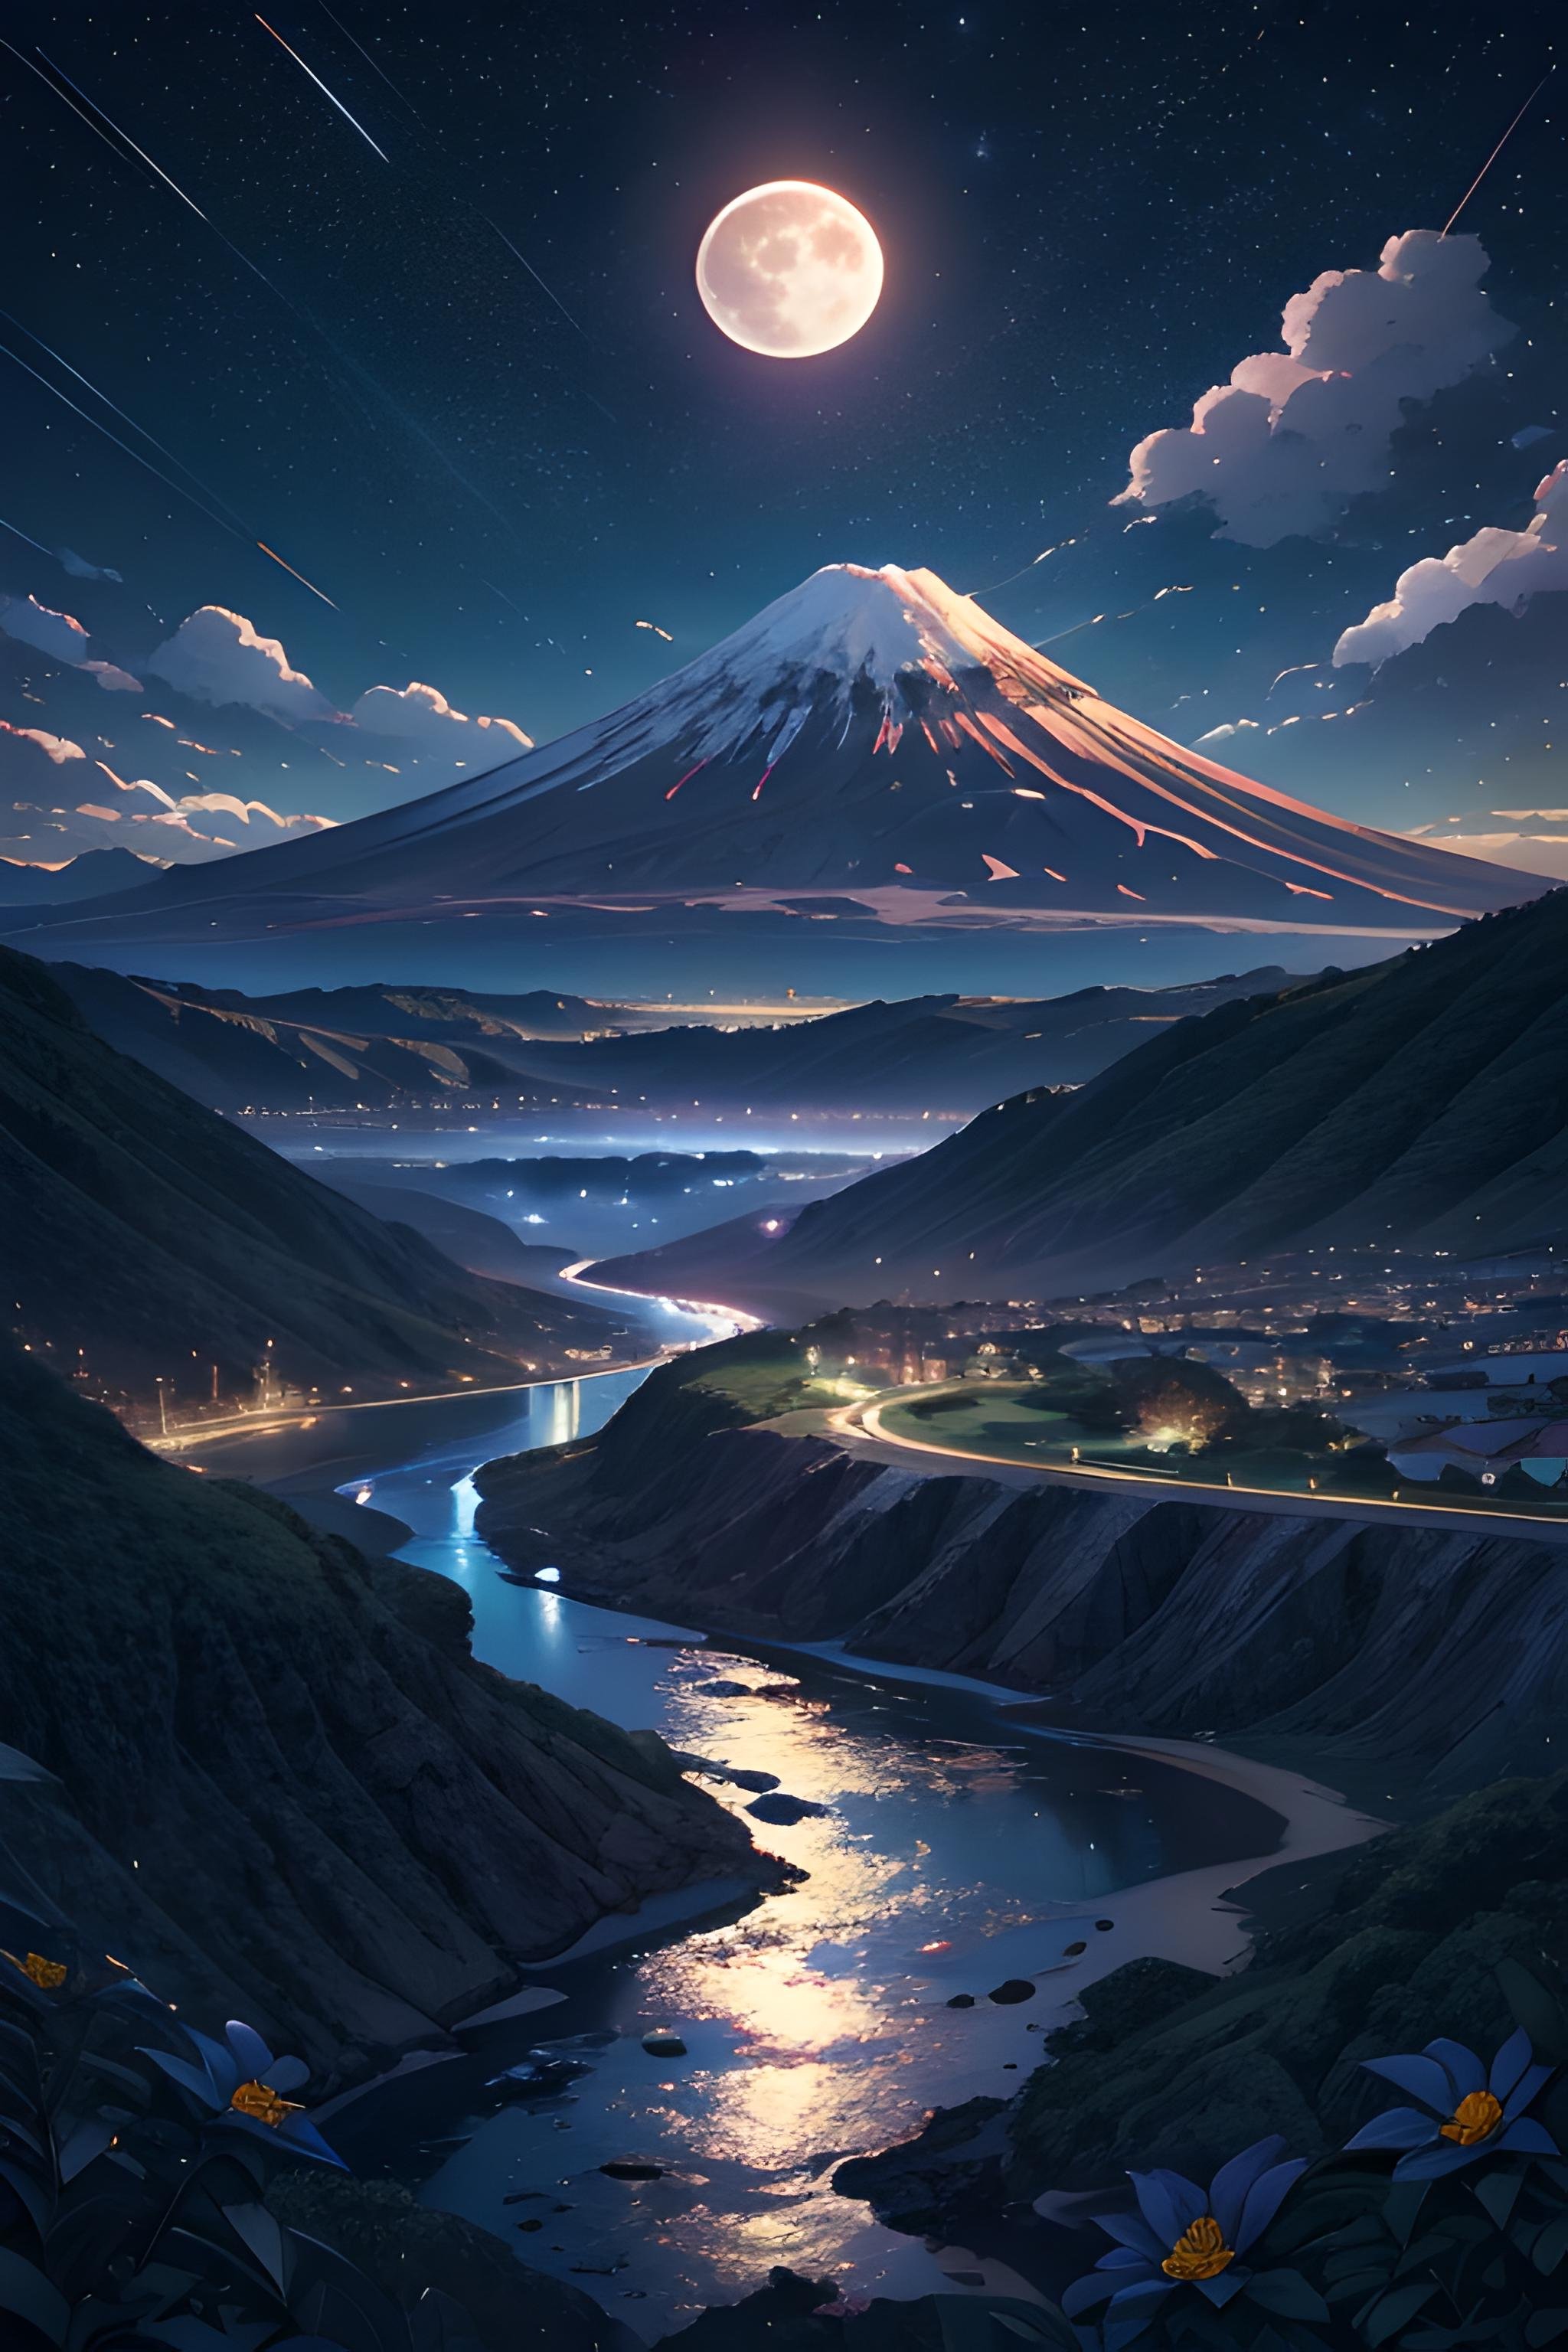 a night scene with a full moon in the sky, detailed digital anime art, volcano valley, けもの, # digital 2 d, music album art, night time with starry sky, streaming on twitch, 2 5 6 x 2 5 6 pixels, fragments, devinart, unconnected, cover, blue hour, summer night, anime visual, flowing hills <lora:Fantasy_style_background:0.7>